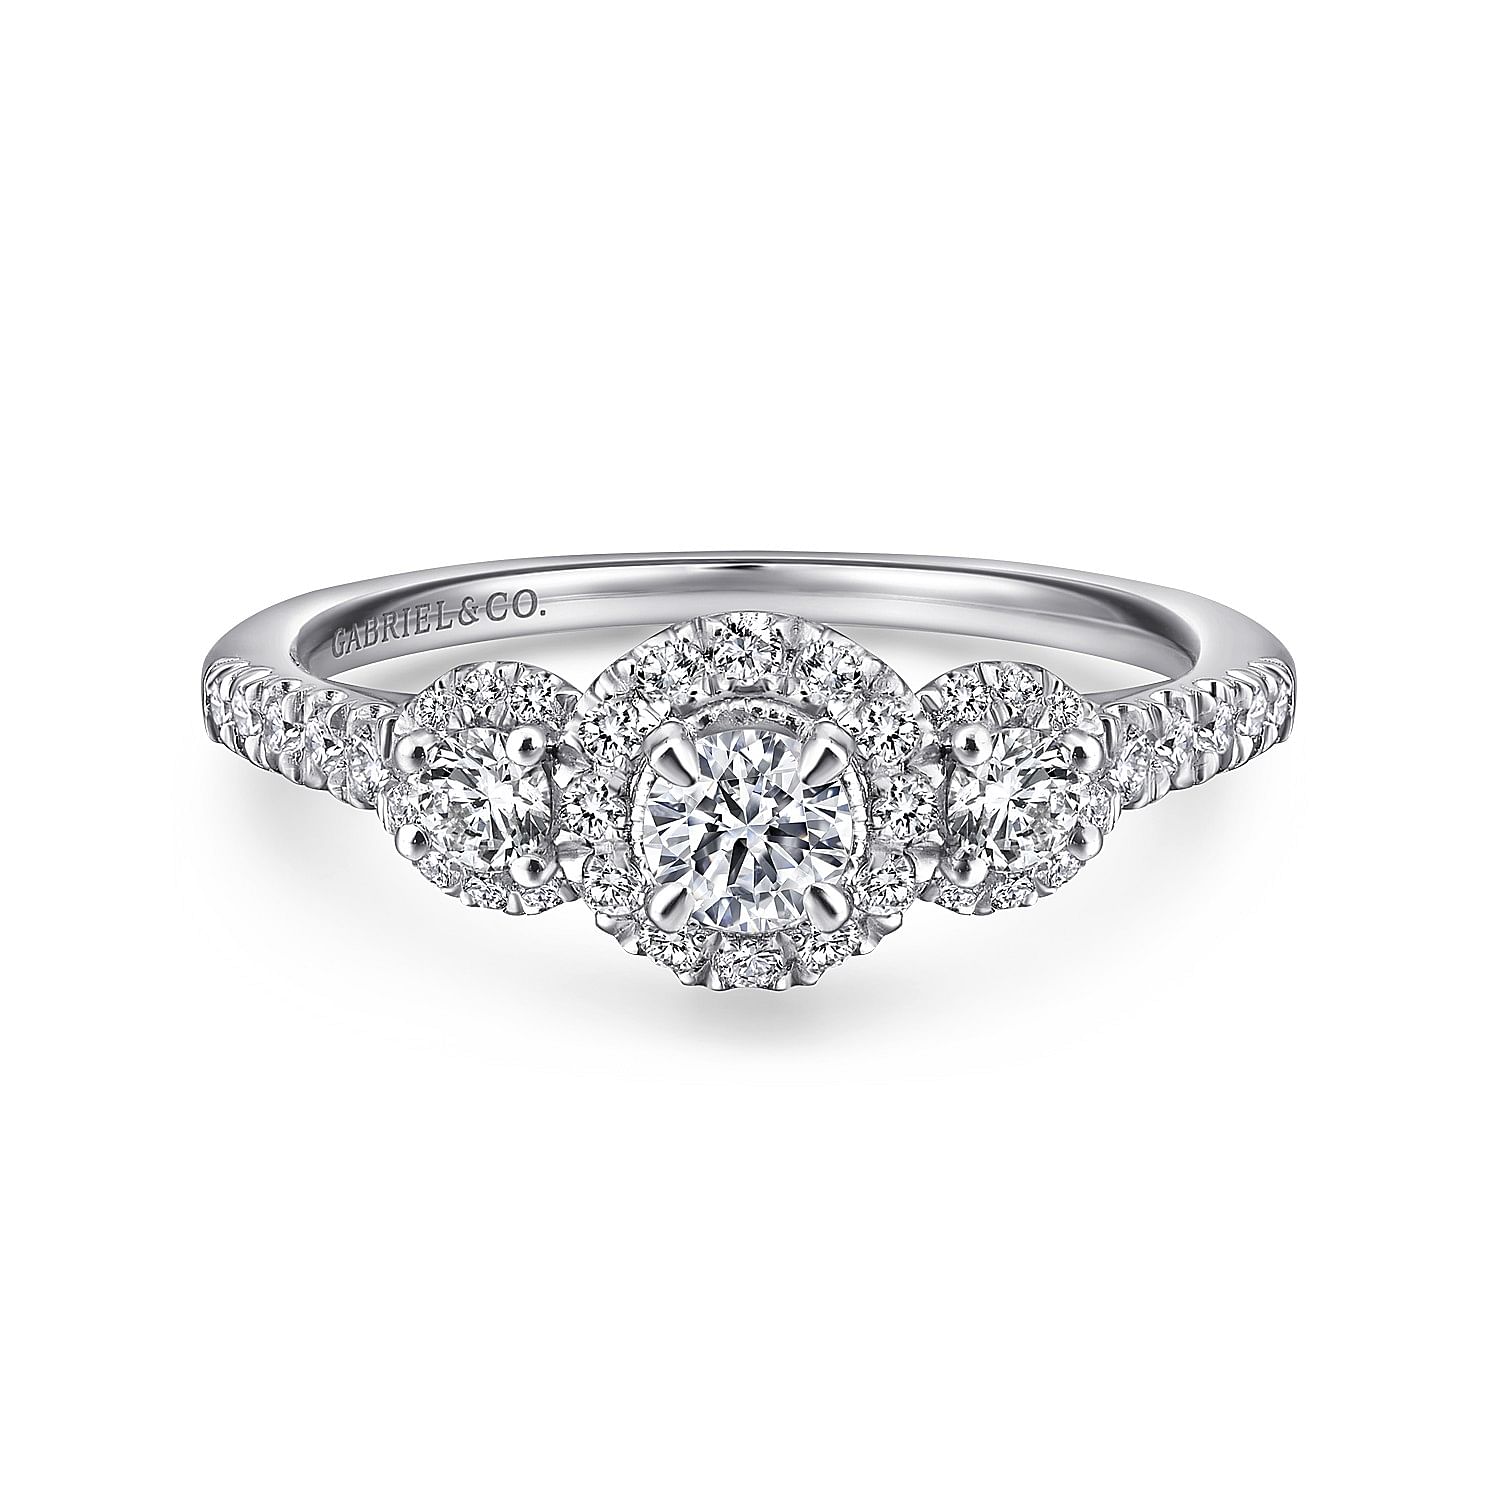 Danny - 14K White-Rose Gold Round Complete Diamond Engagement Ring